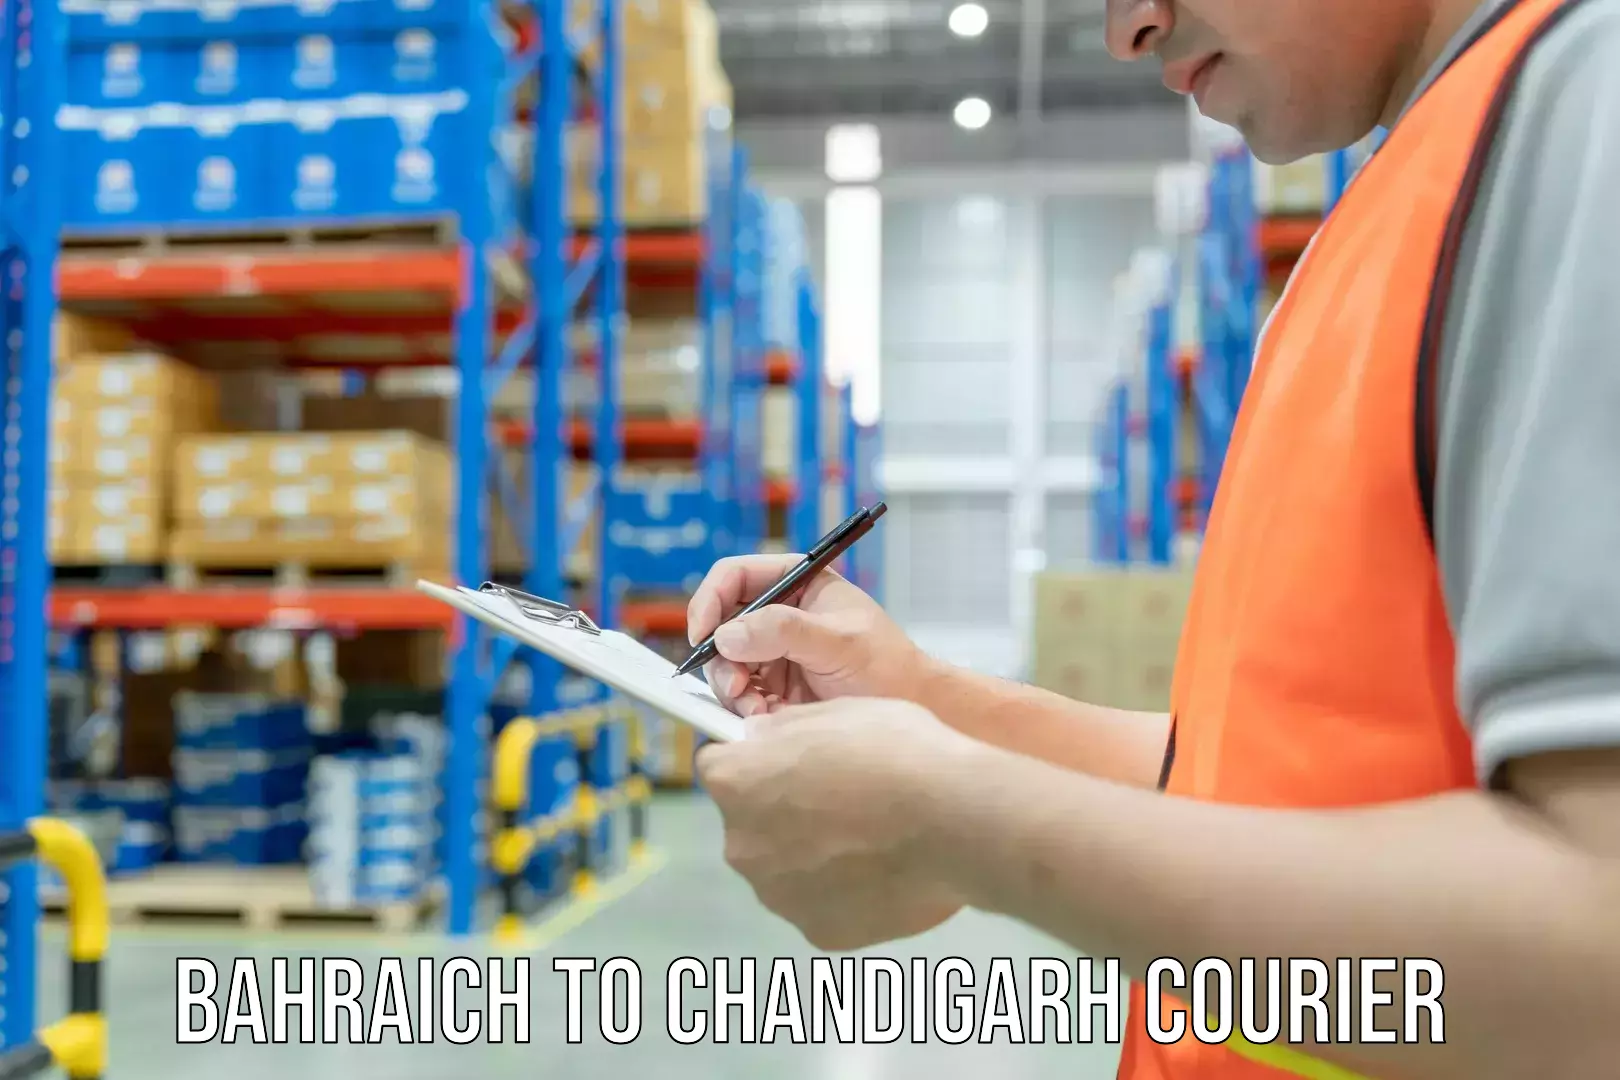 Courier service partnerships Bahraich to Chandigarh